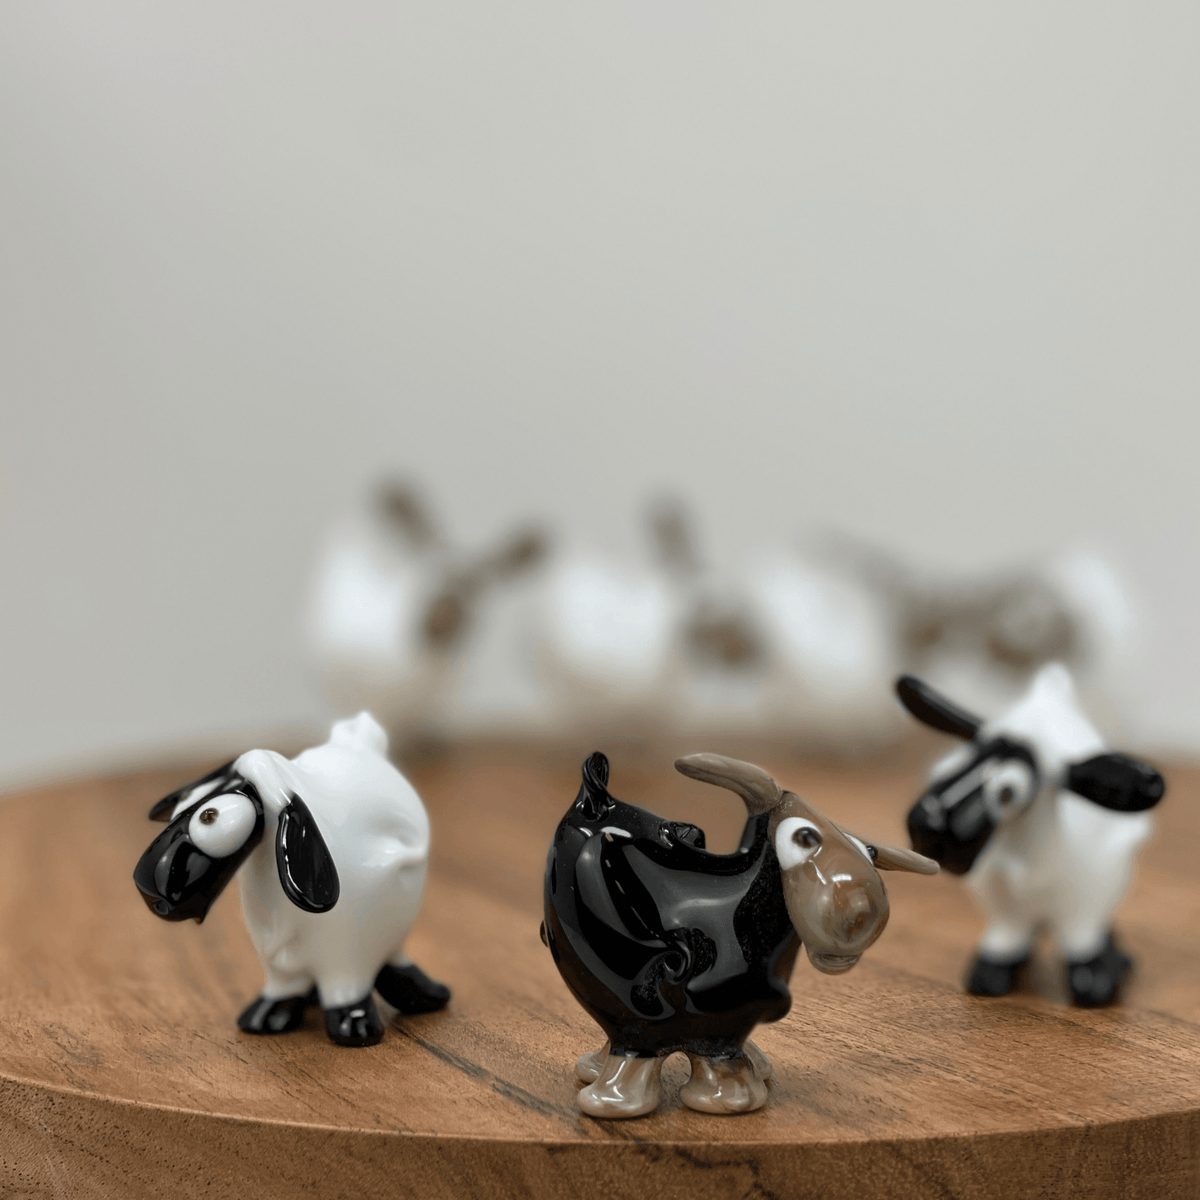 Murano Glass Sheep, Glass Sculpture, Figurines, Set of 3, Made in Italy at MyItalianDecor